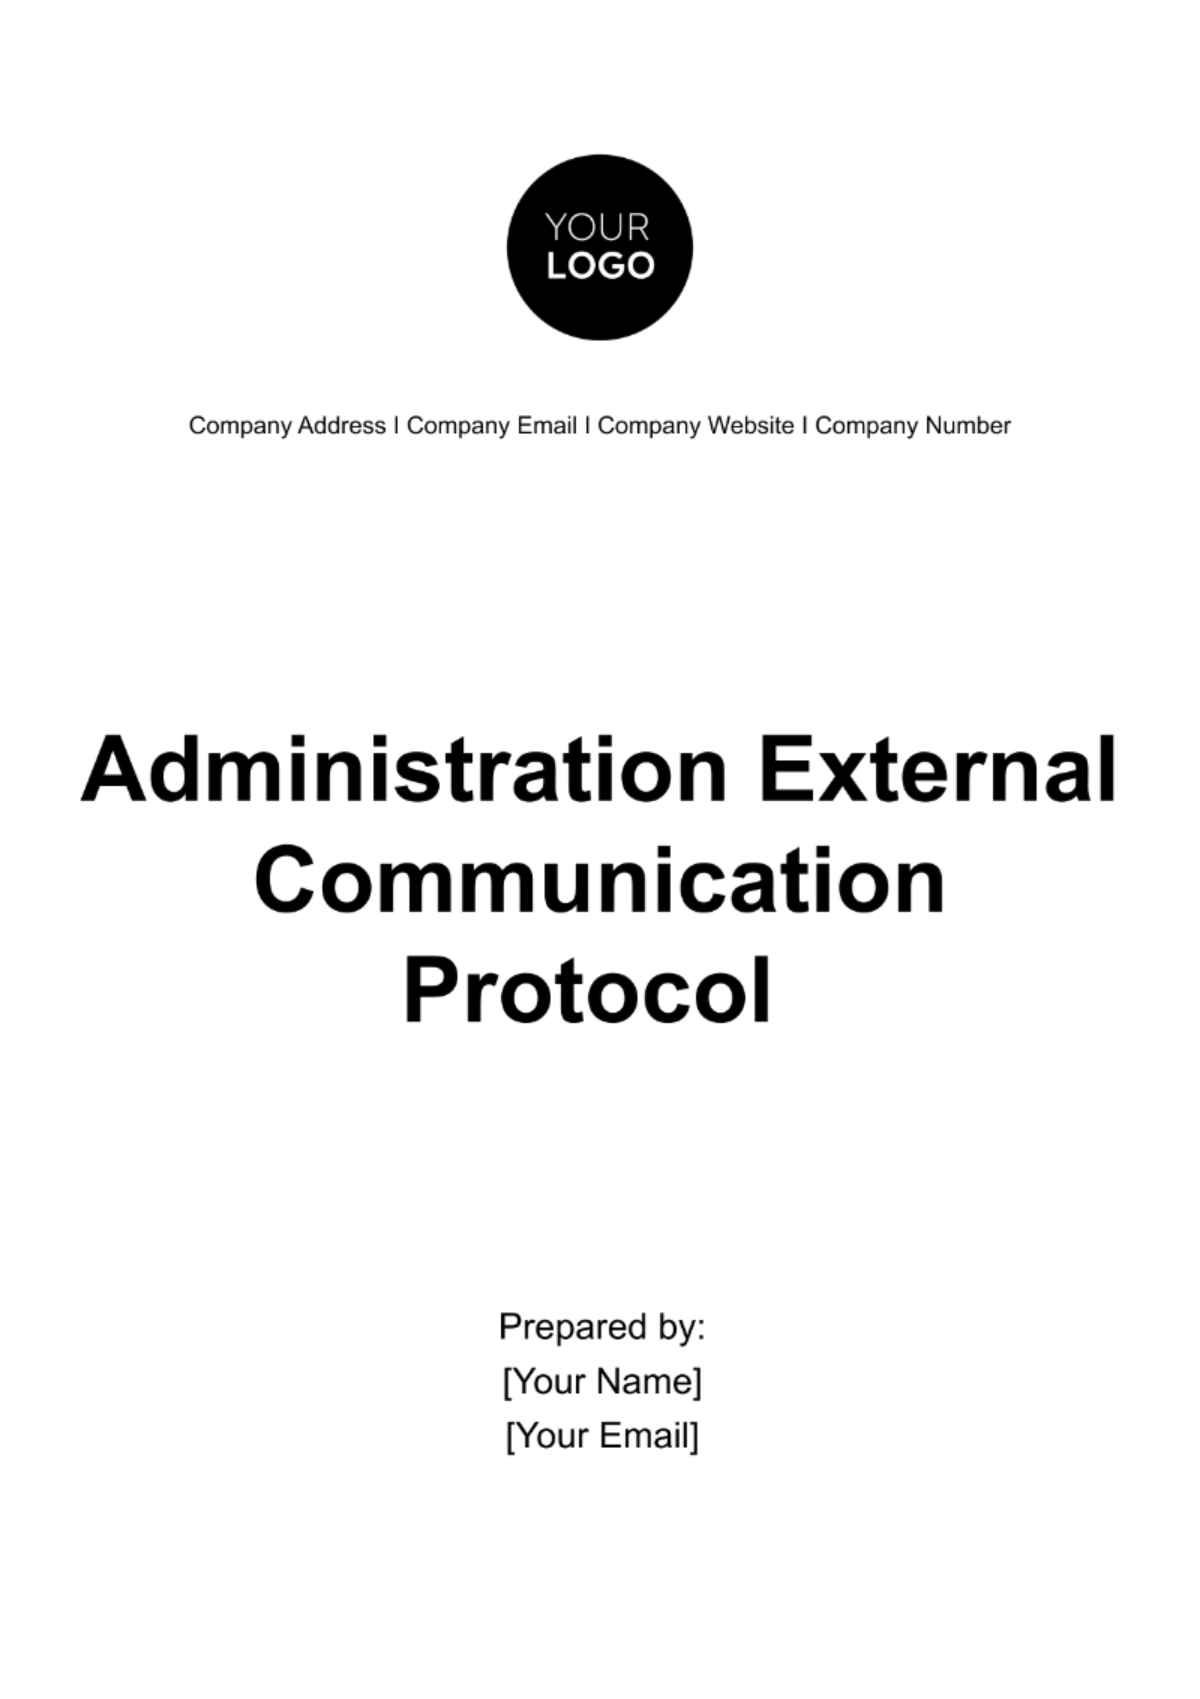 Free Administration External Communication Protocol Template